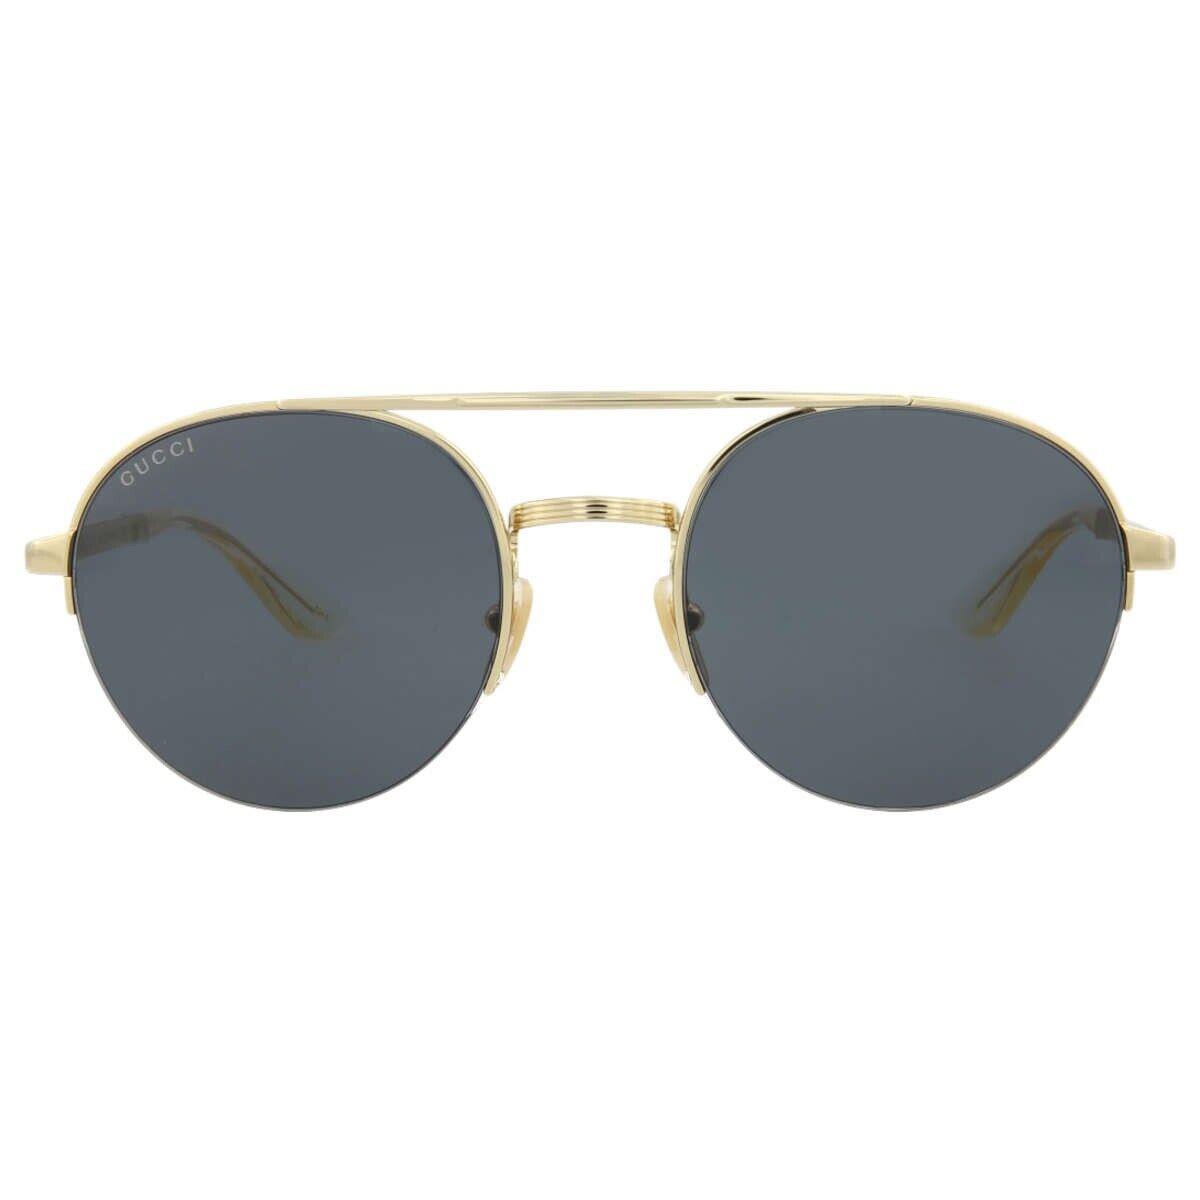 Gucci GG0984S 001 Aviator Gold Sunglasses with Grey Lenses